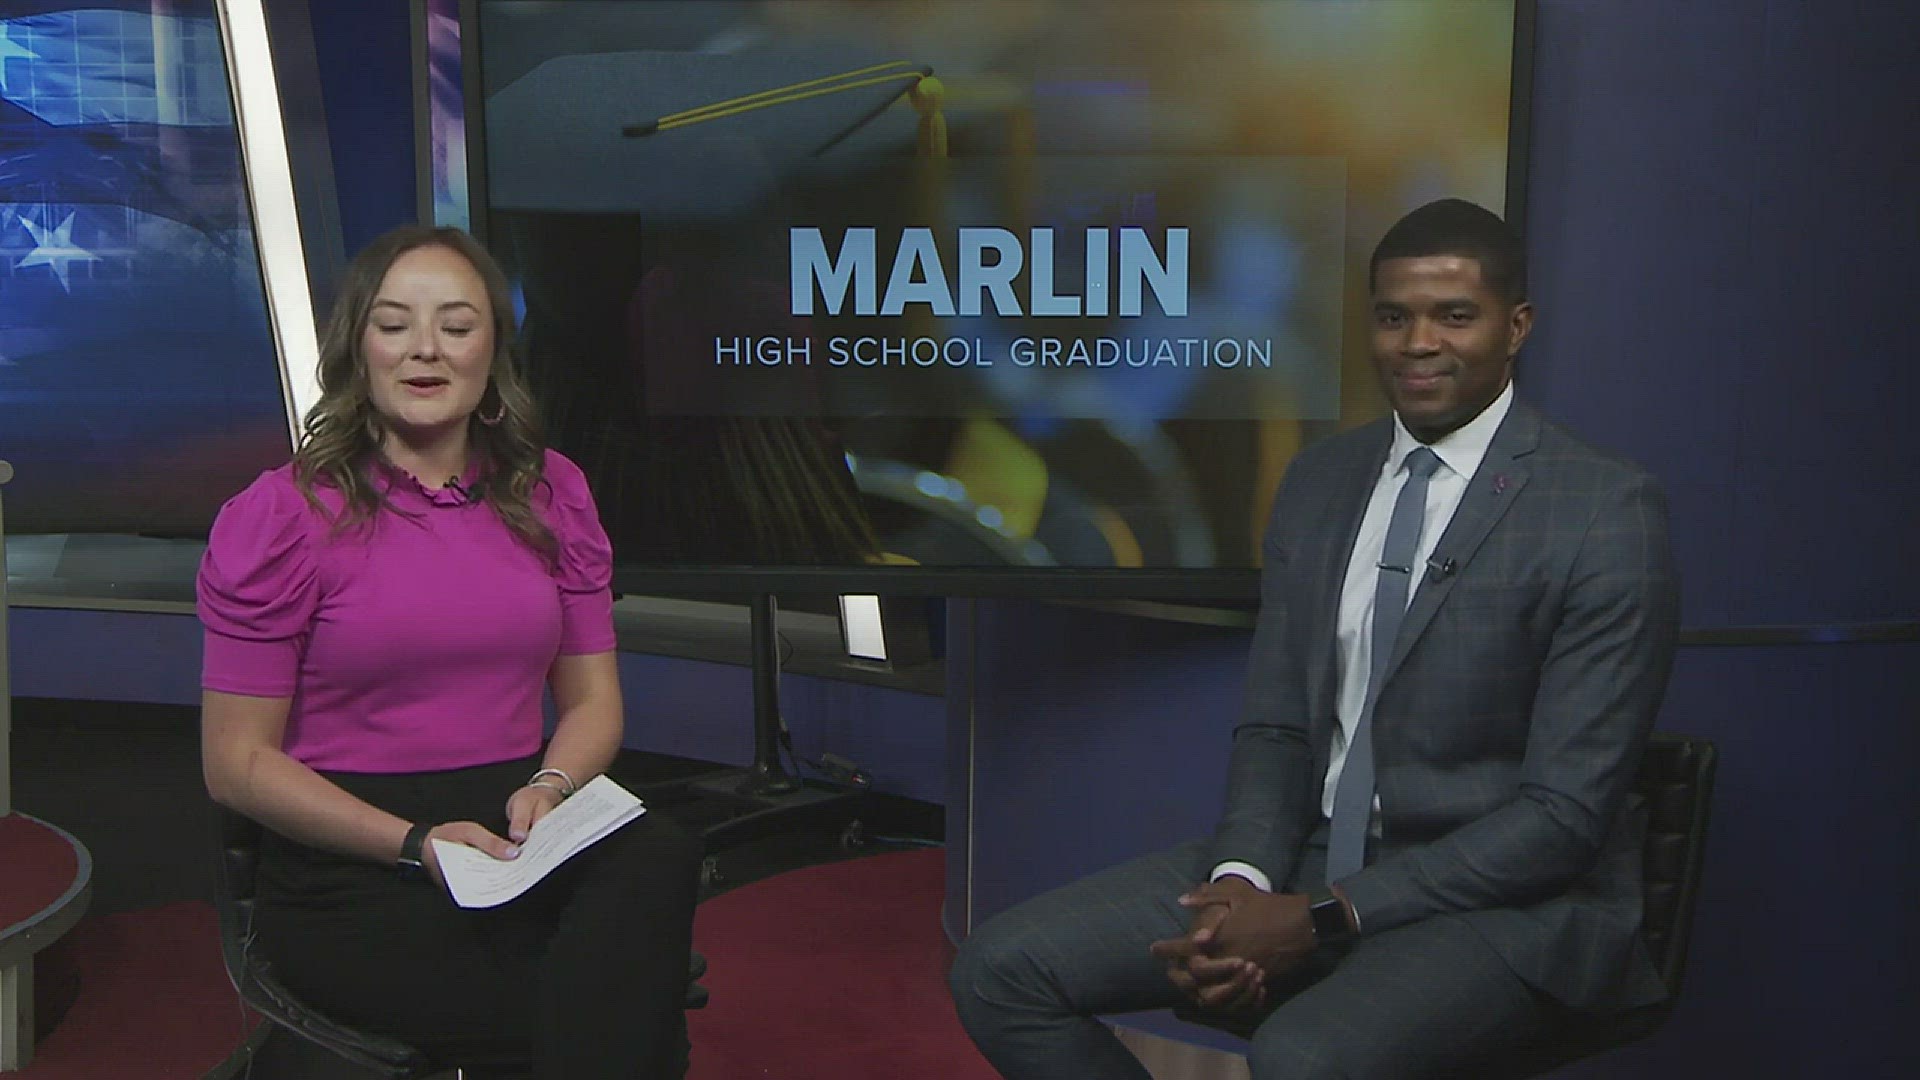 Indepth interview with Marlin ISD Superintendent on 2023 graduation